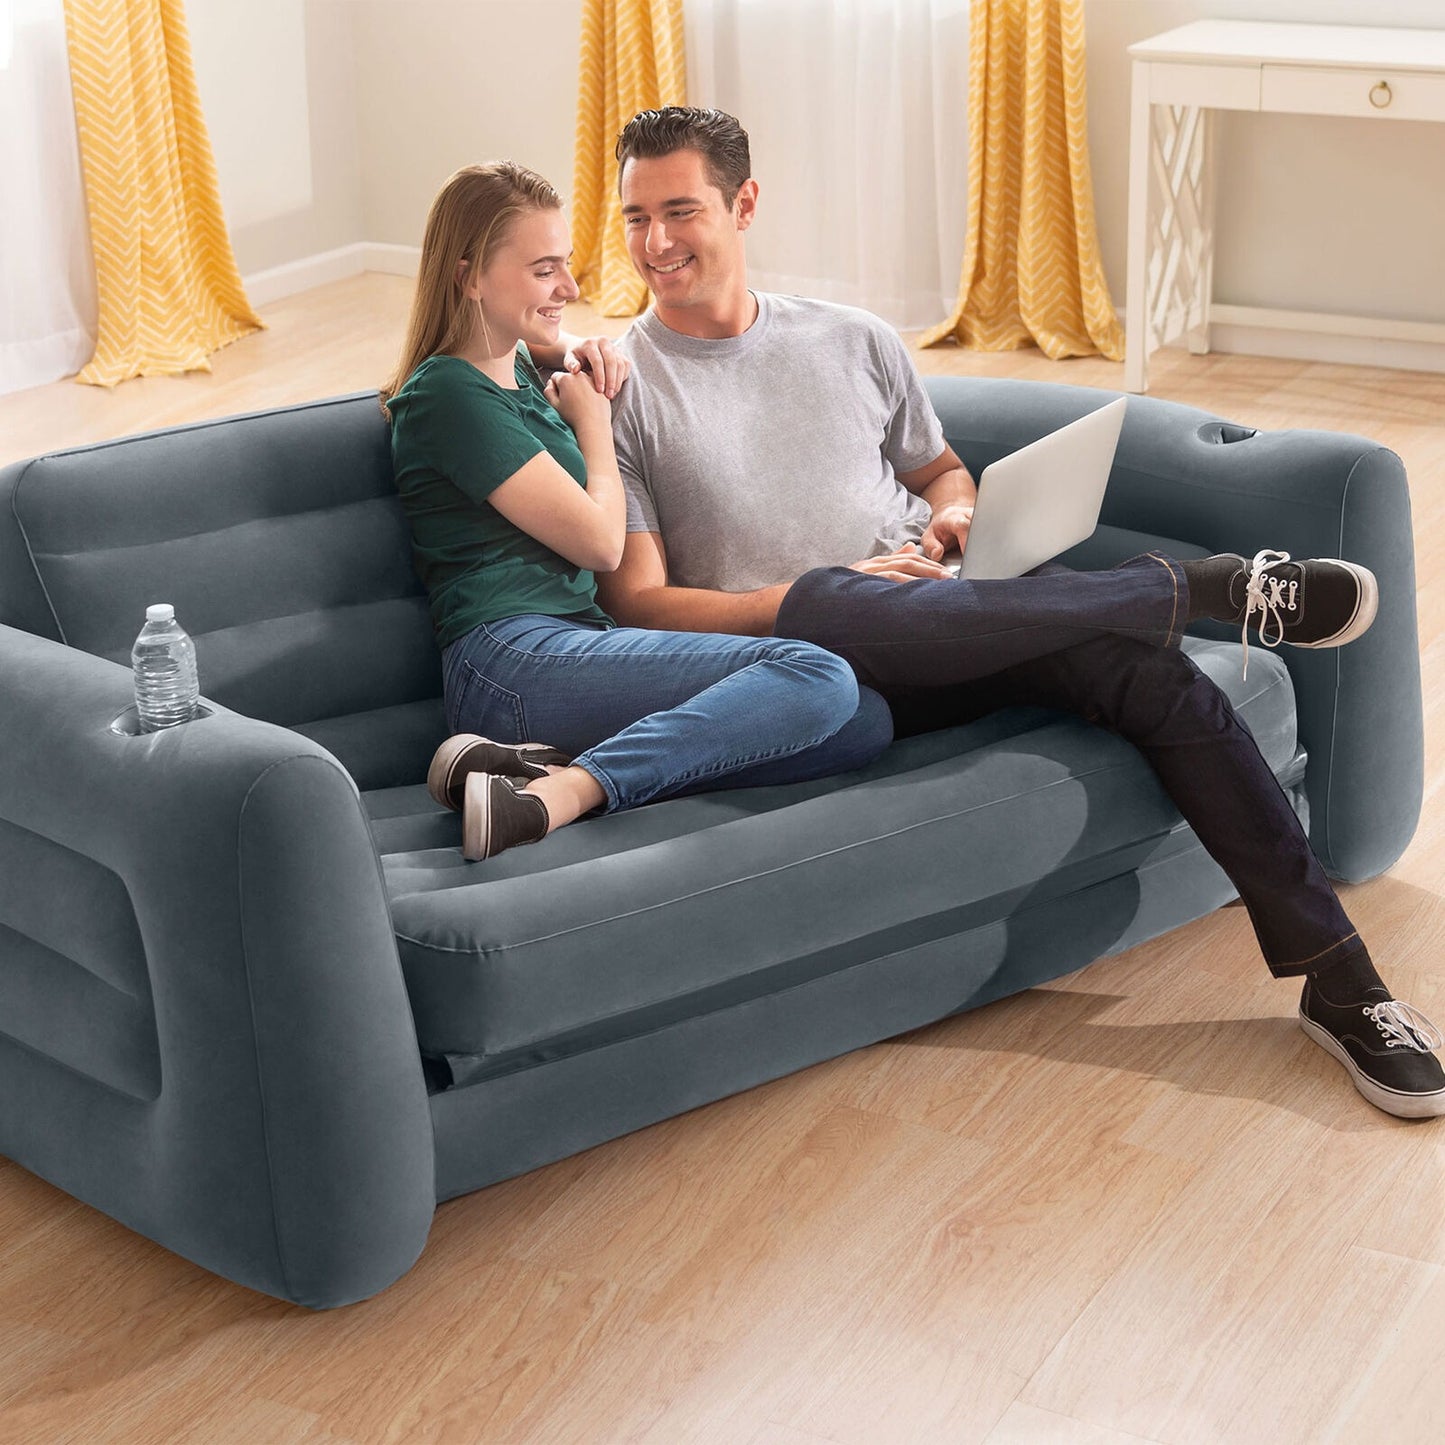 INTEX  Inflatable Pull-Out Sofa